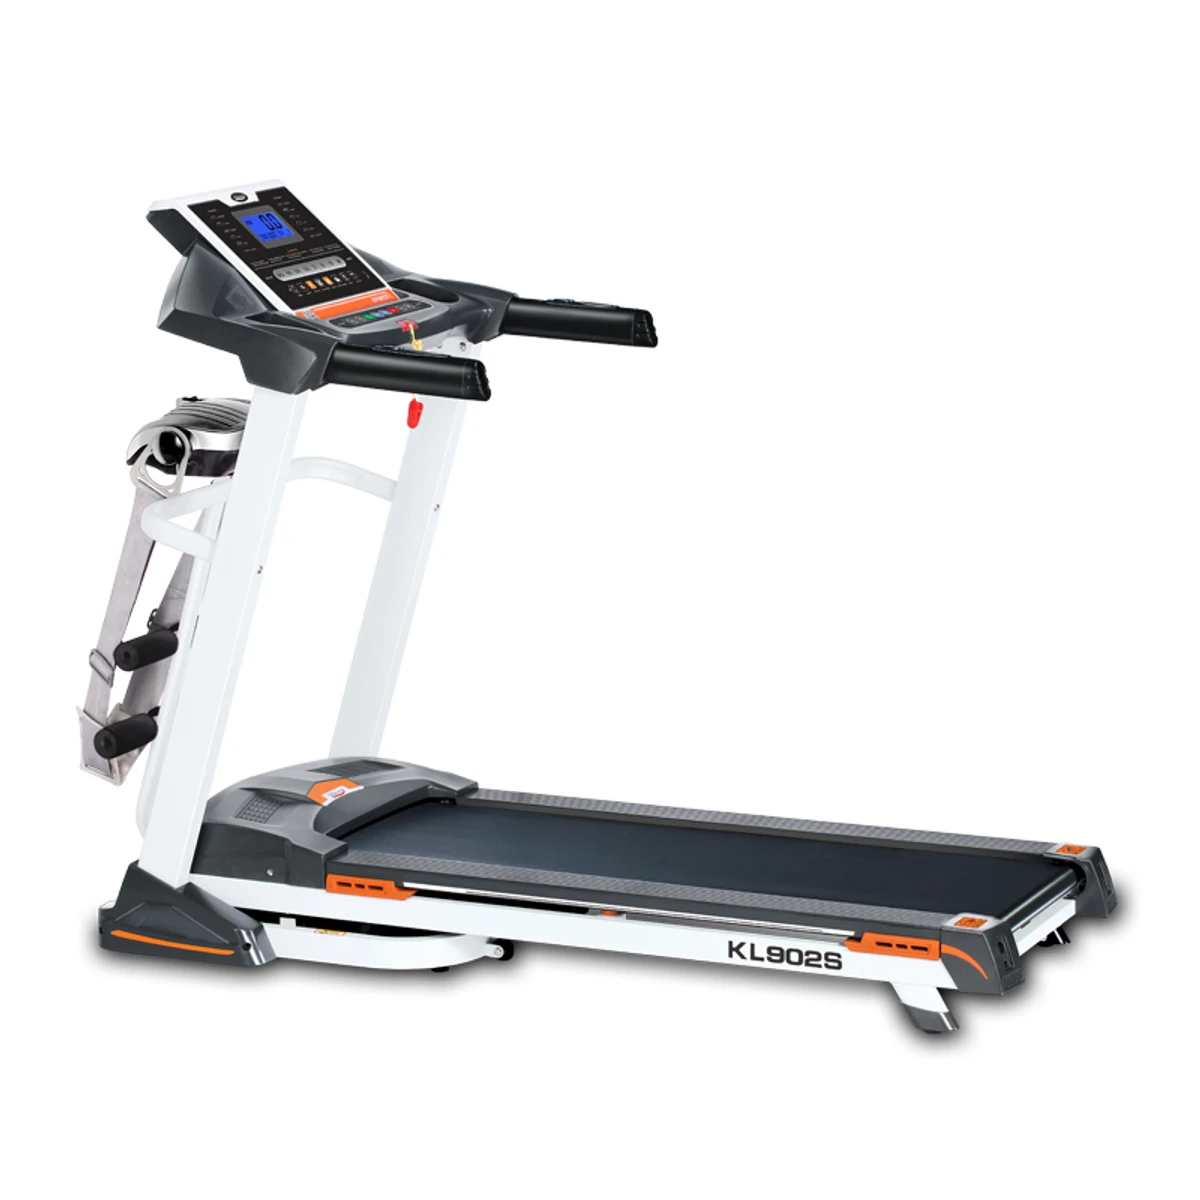 Daily youth KL902S Multi-function Foldable Motorized Treadmill